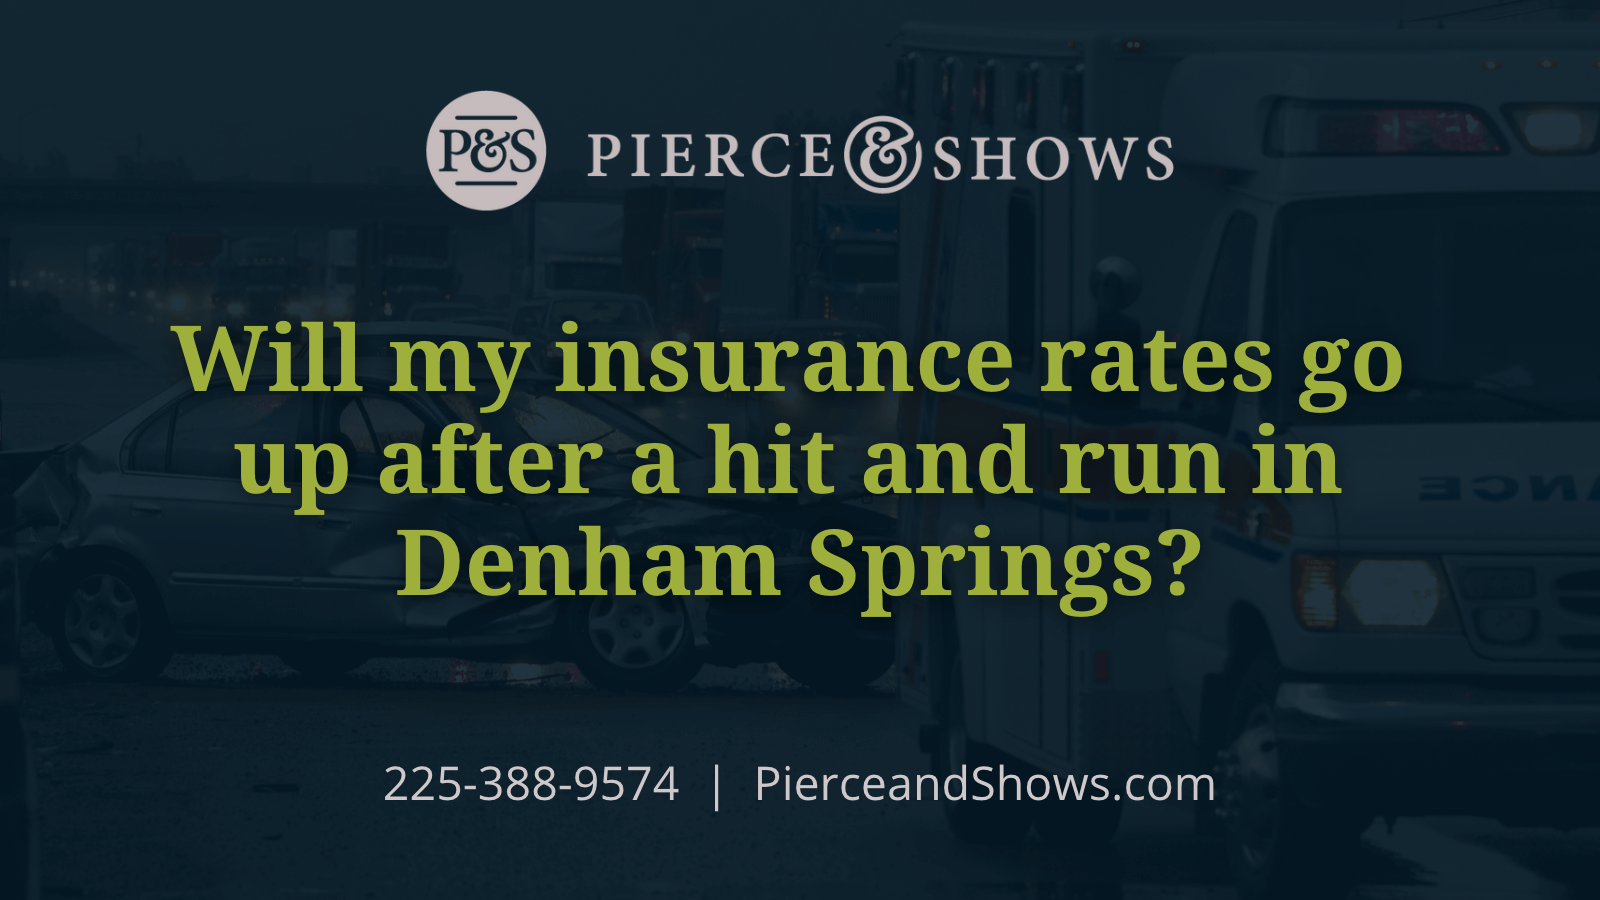 Will my insurance rates go up after a hit and run in Denham Springs - Baton Rouge Louisiana injury attorney Pierce & Shows